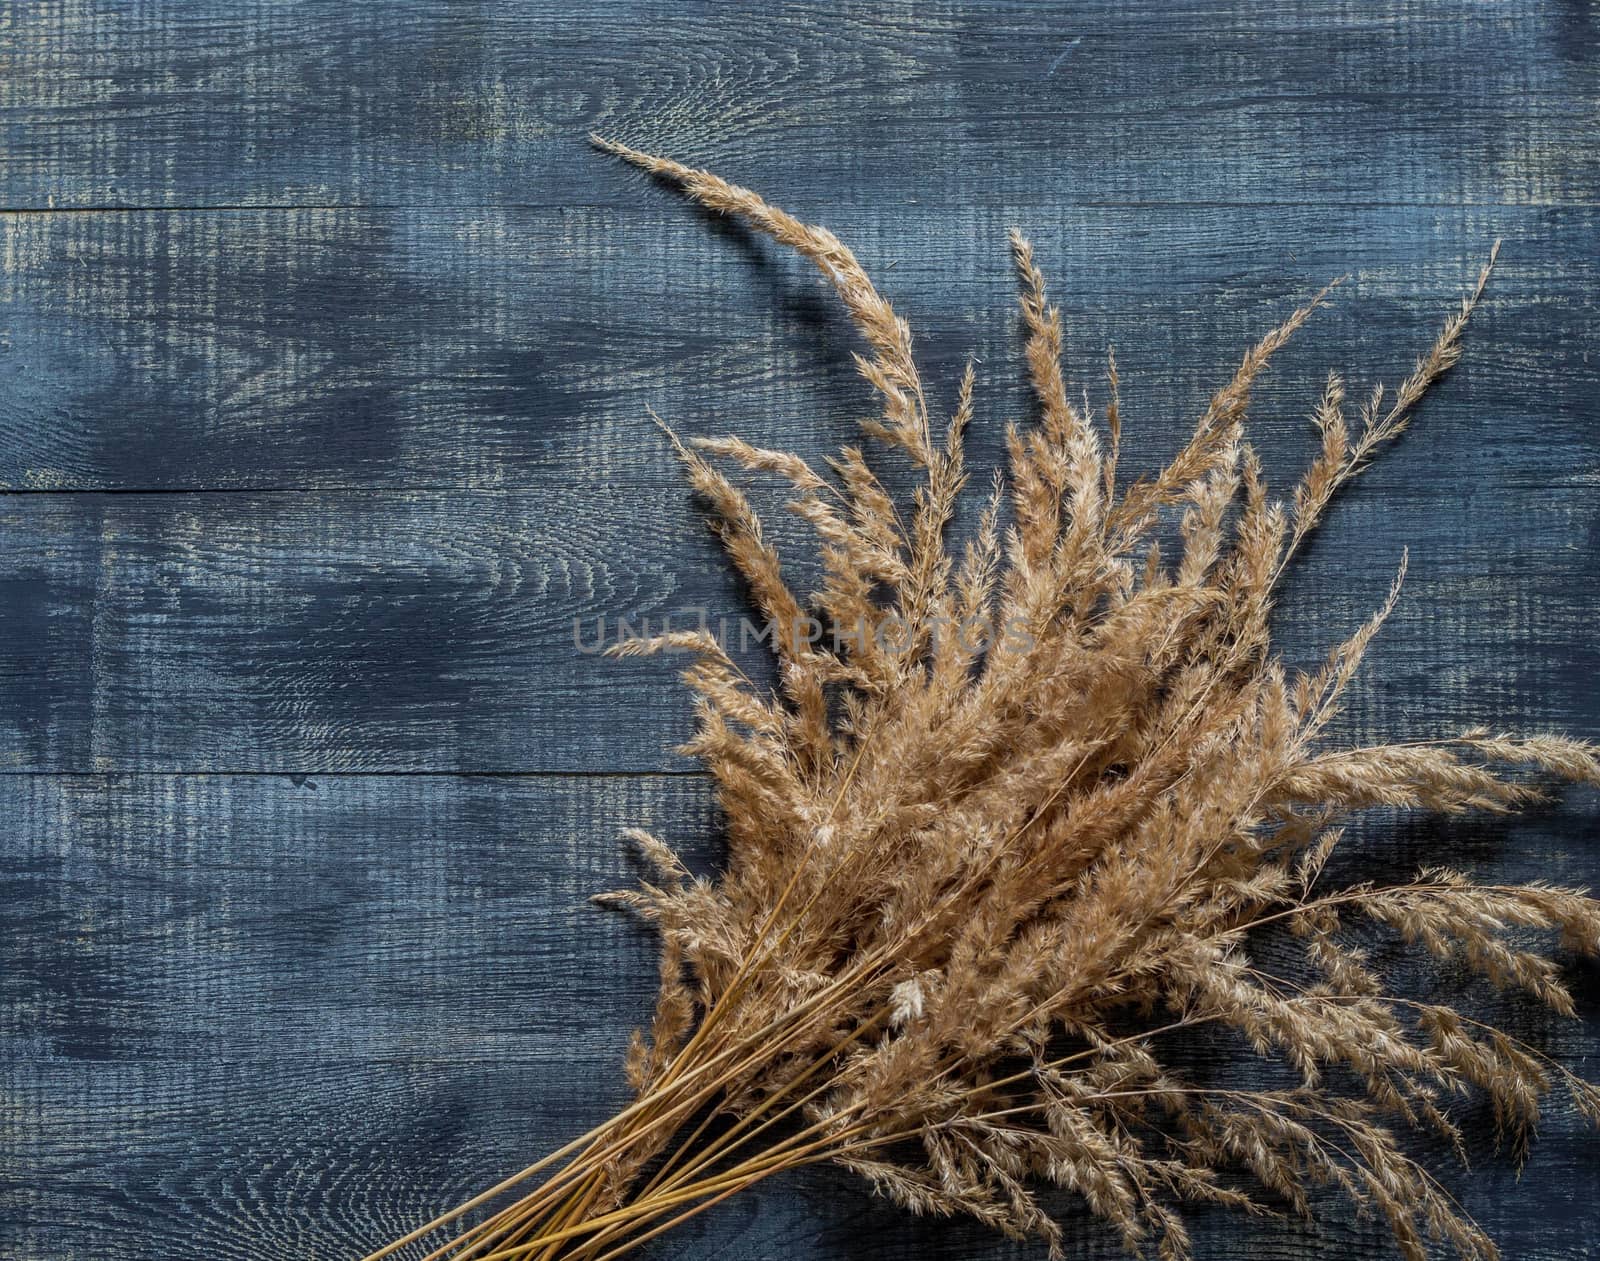 Autumn flat lay with dry ears of wheat on a dark wooden background by galinasharapova